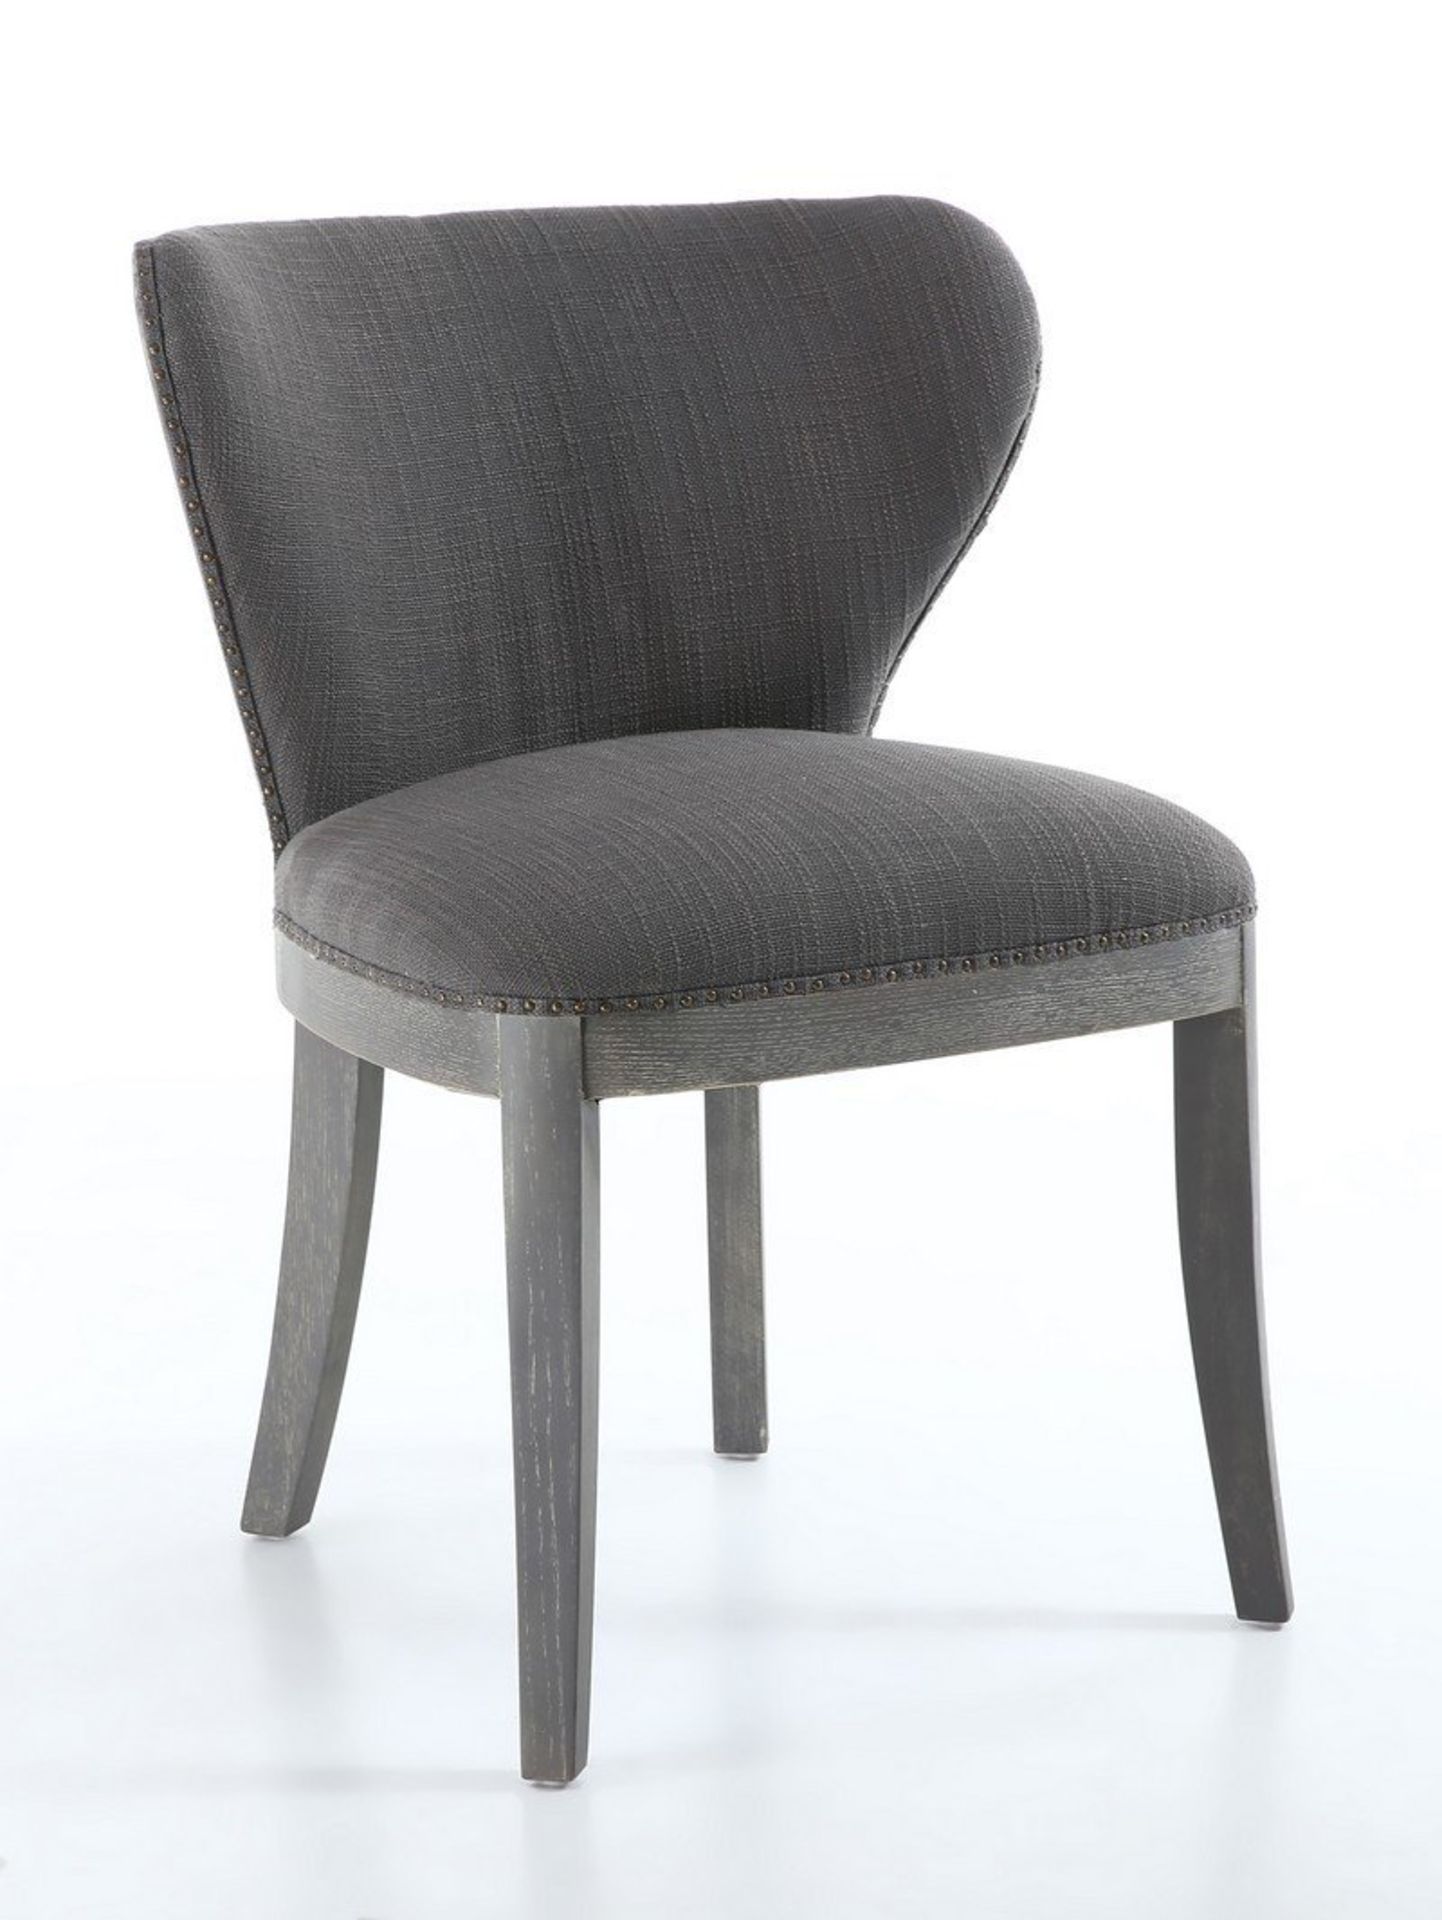 Regal Antique Grey Linen Fabric Wing back Dining chair - Image 5 of 5